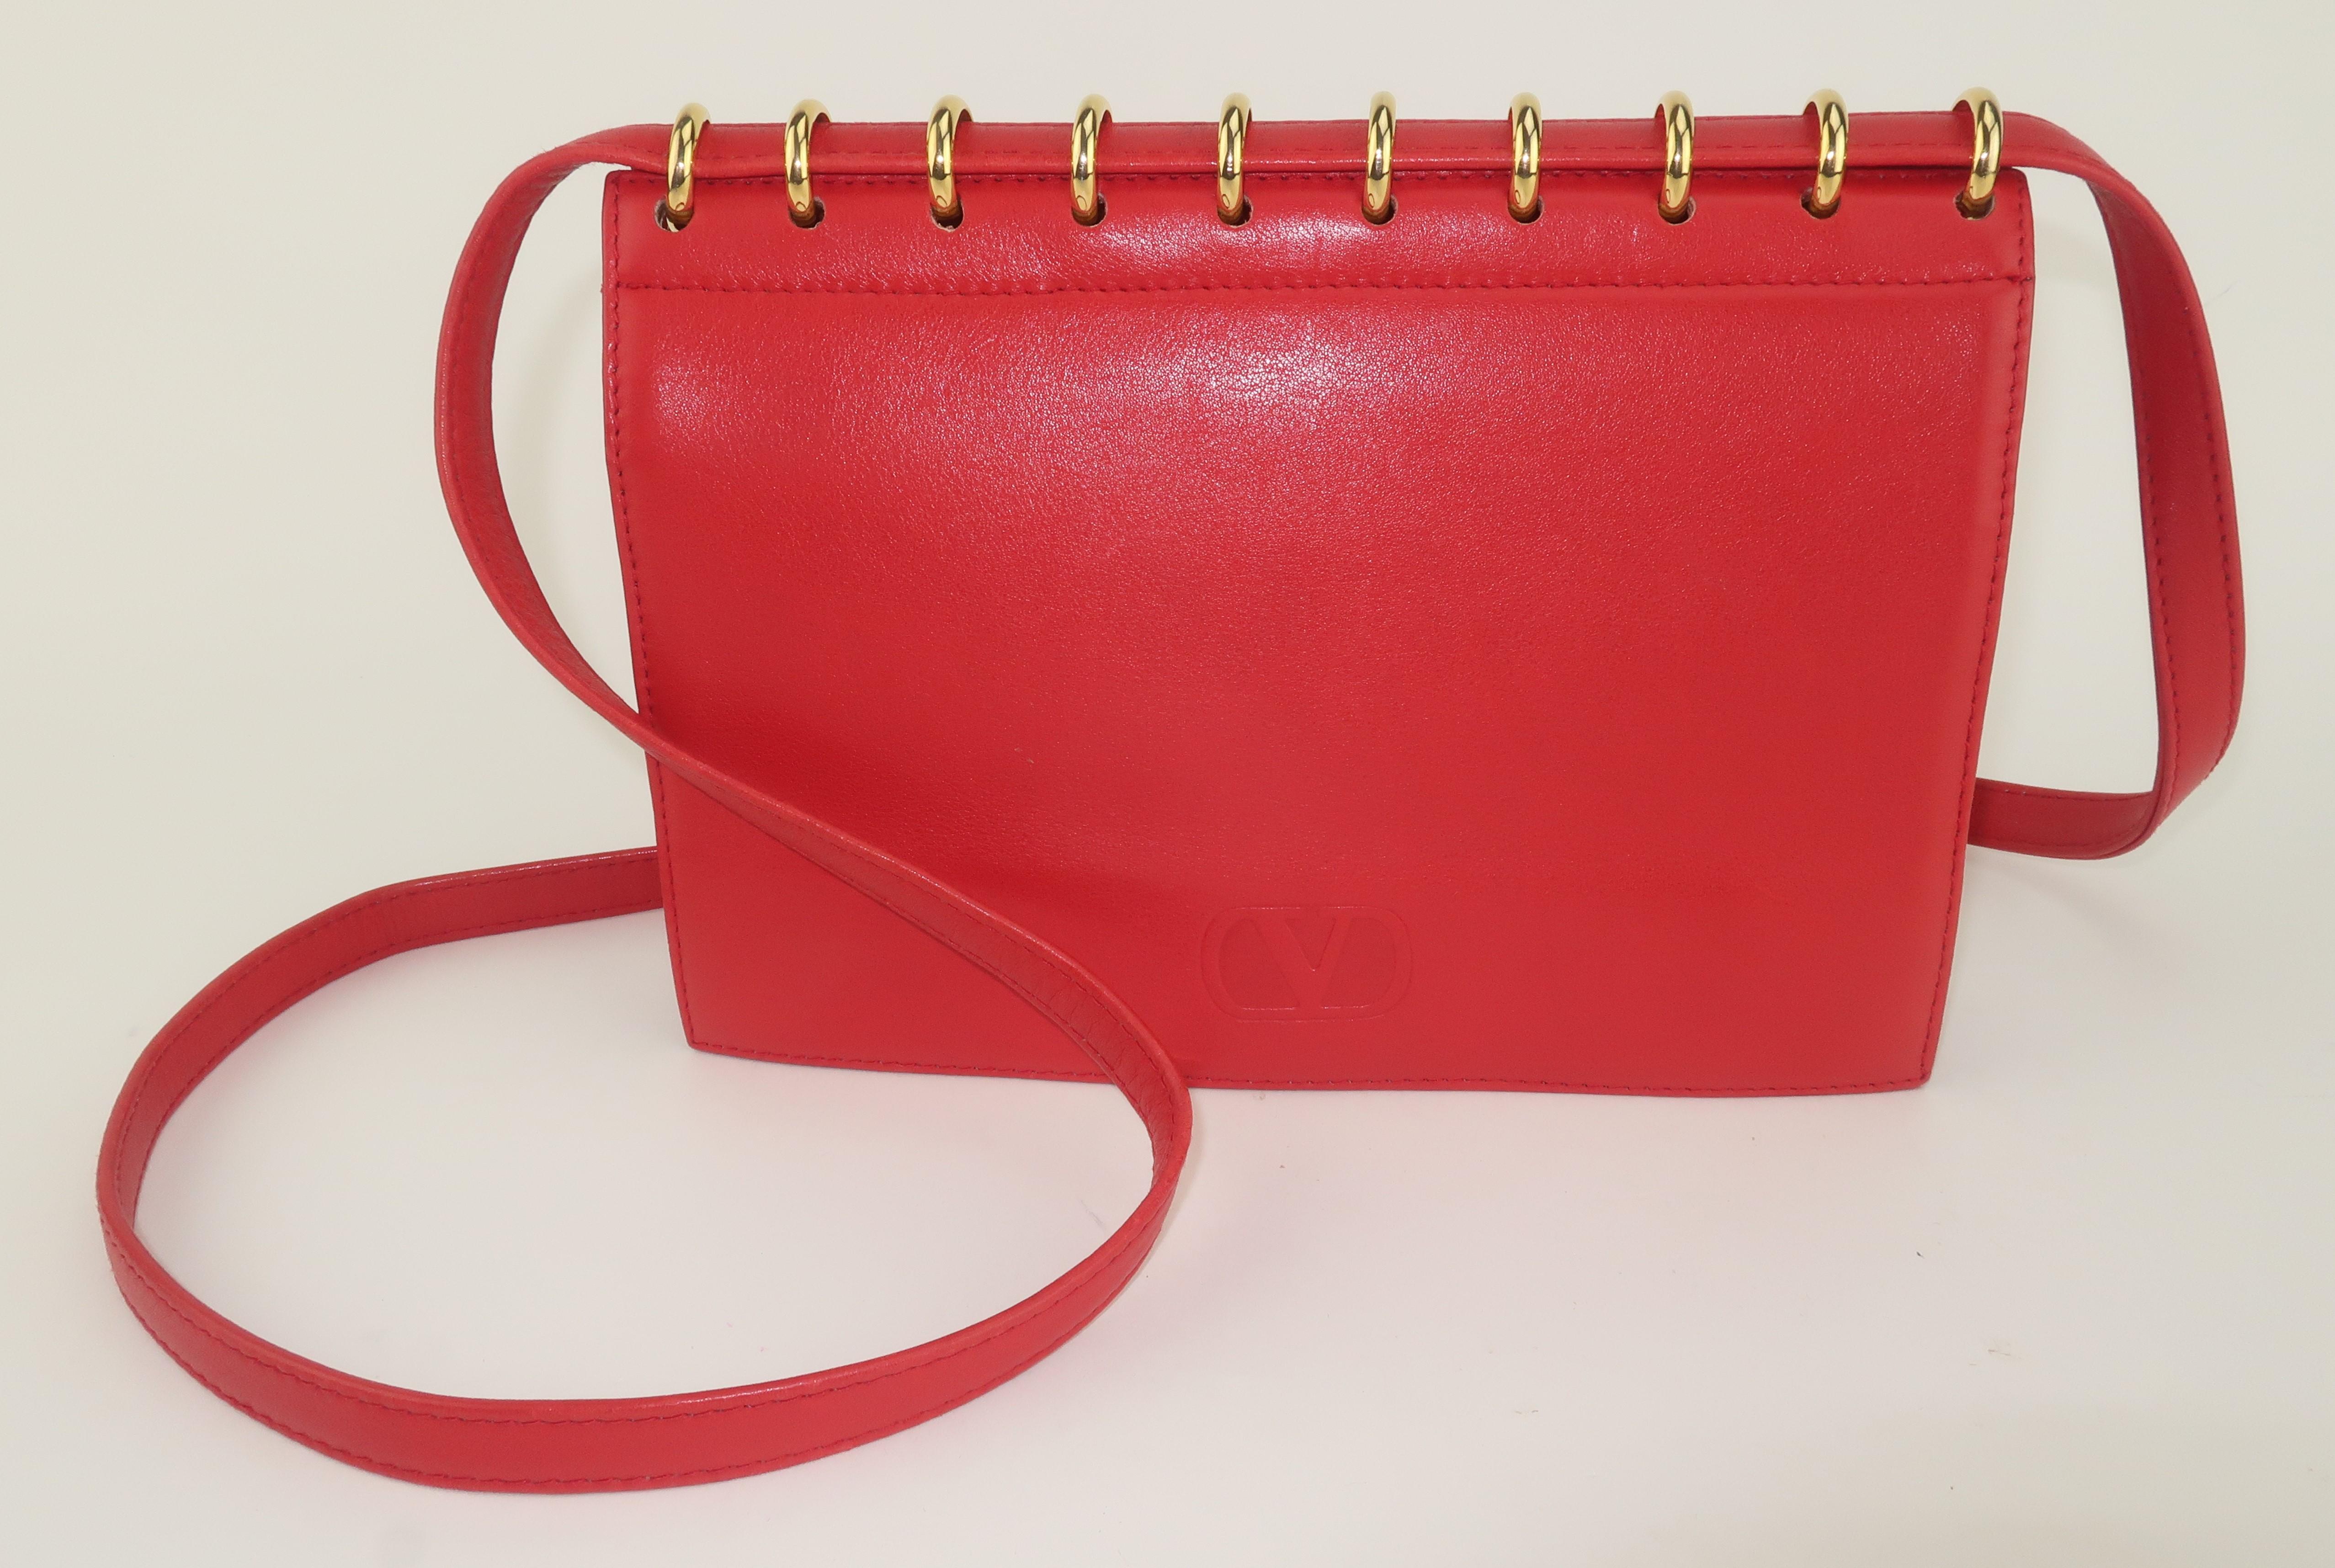 1980’s Valentino Garavani red leather handbag with shoulder strap and unique gold spiral hardware.  The bag is subtly embossed with ‘V’ logo on the front flap which features a double snap closure.  It opens to reveal a leather lined interior which